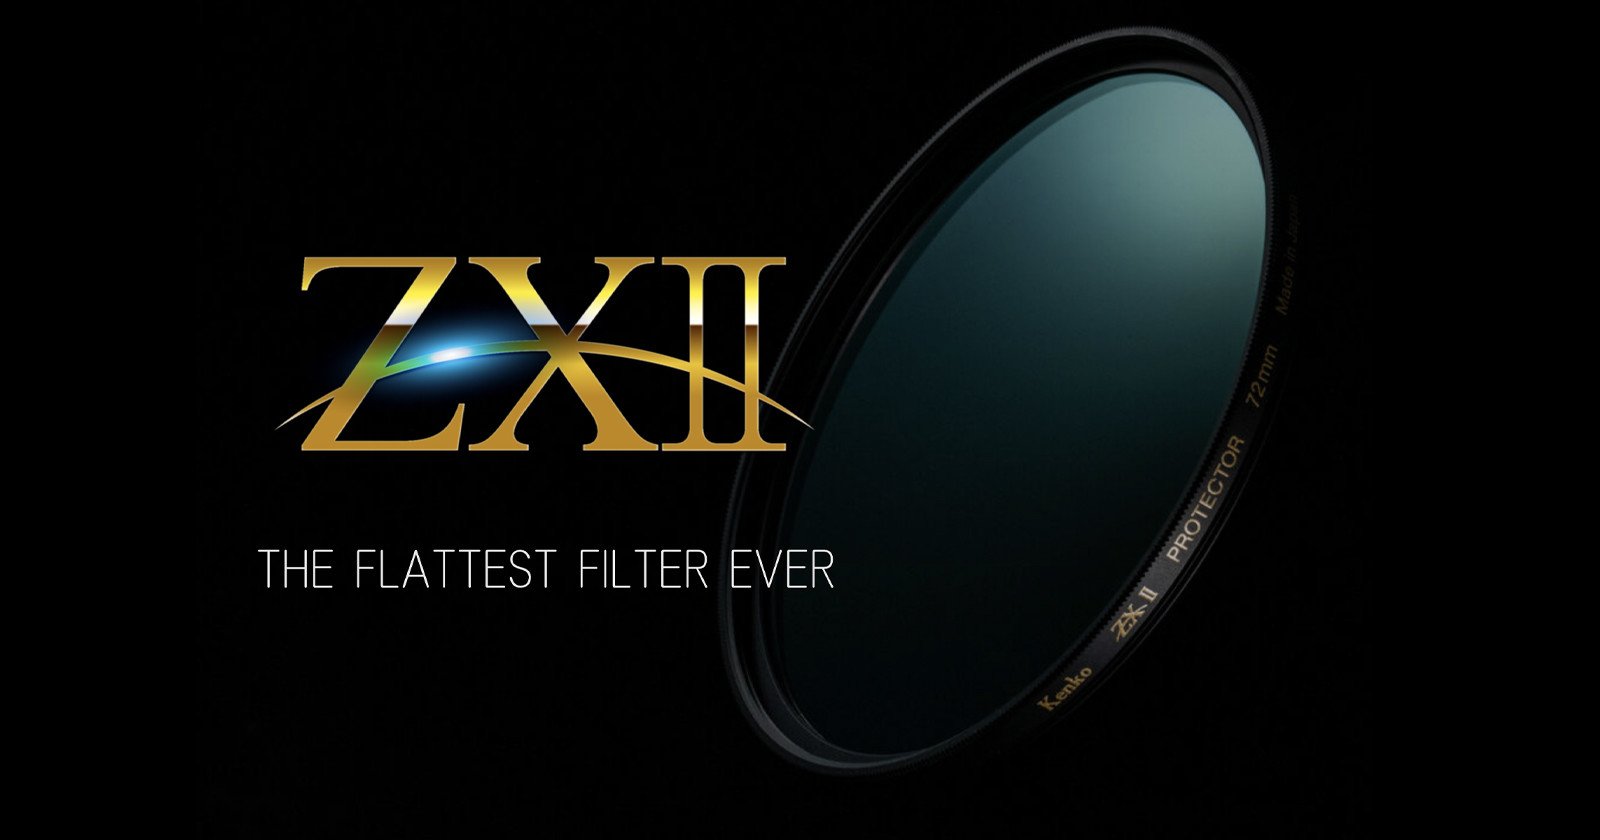 Kenko Says its ZXII Floating Frame Filters Result in No Visible Distortion